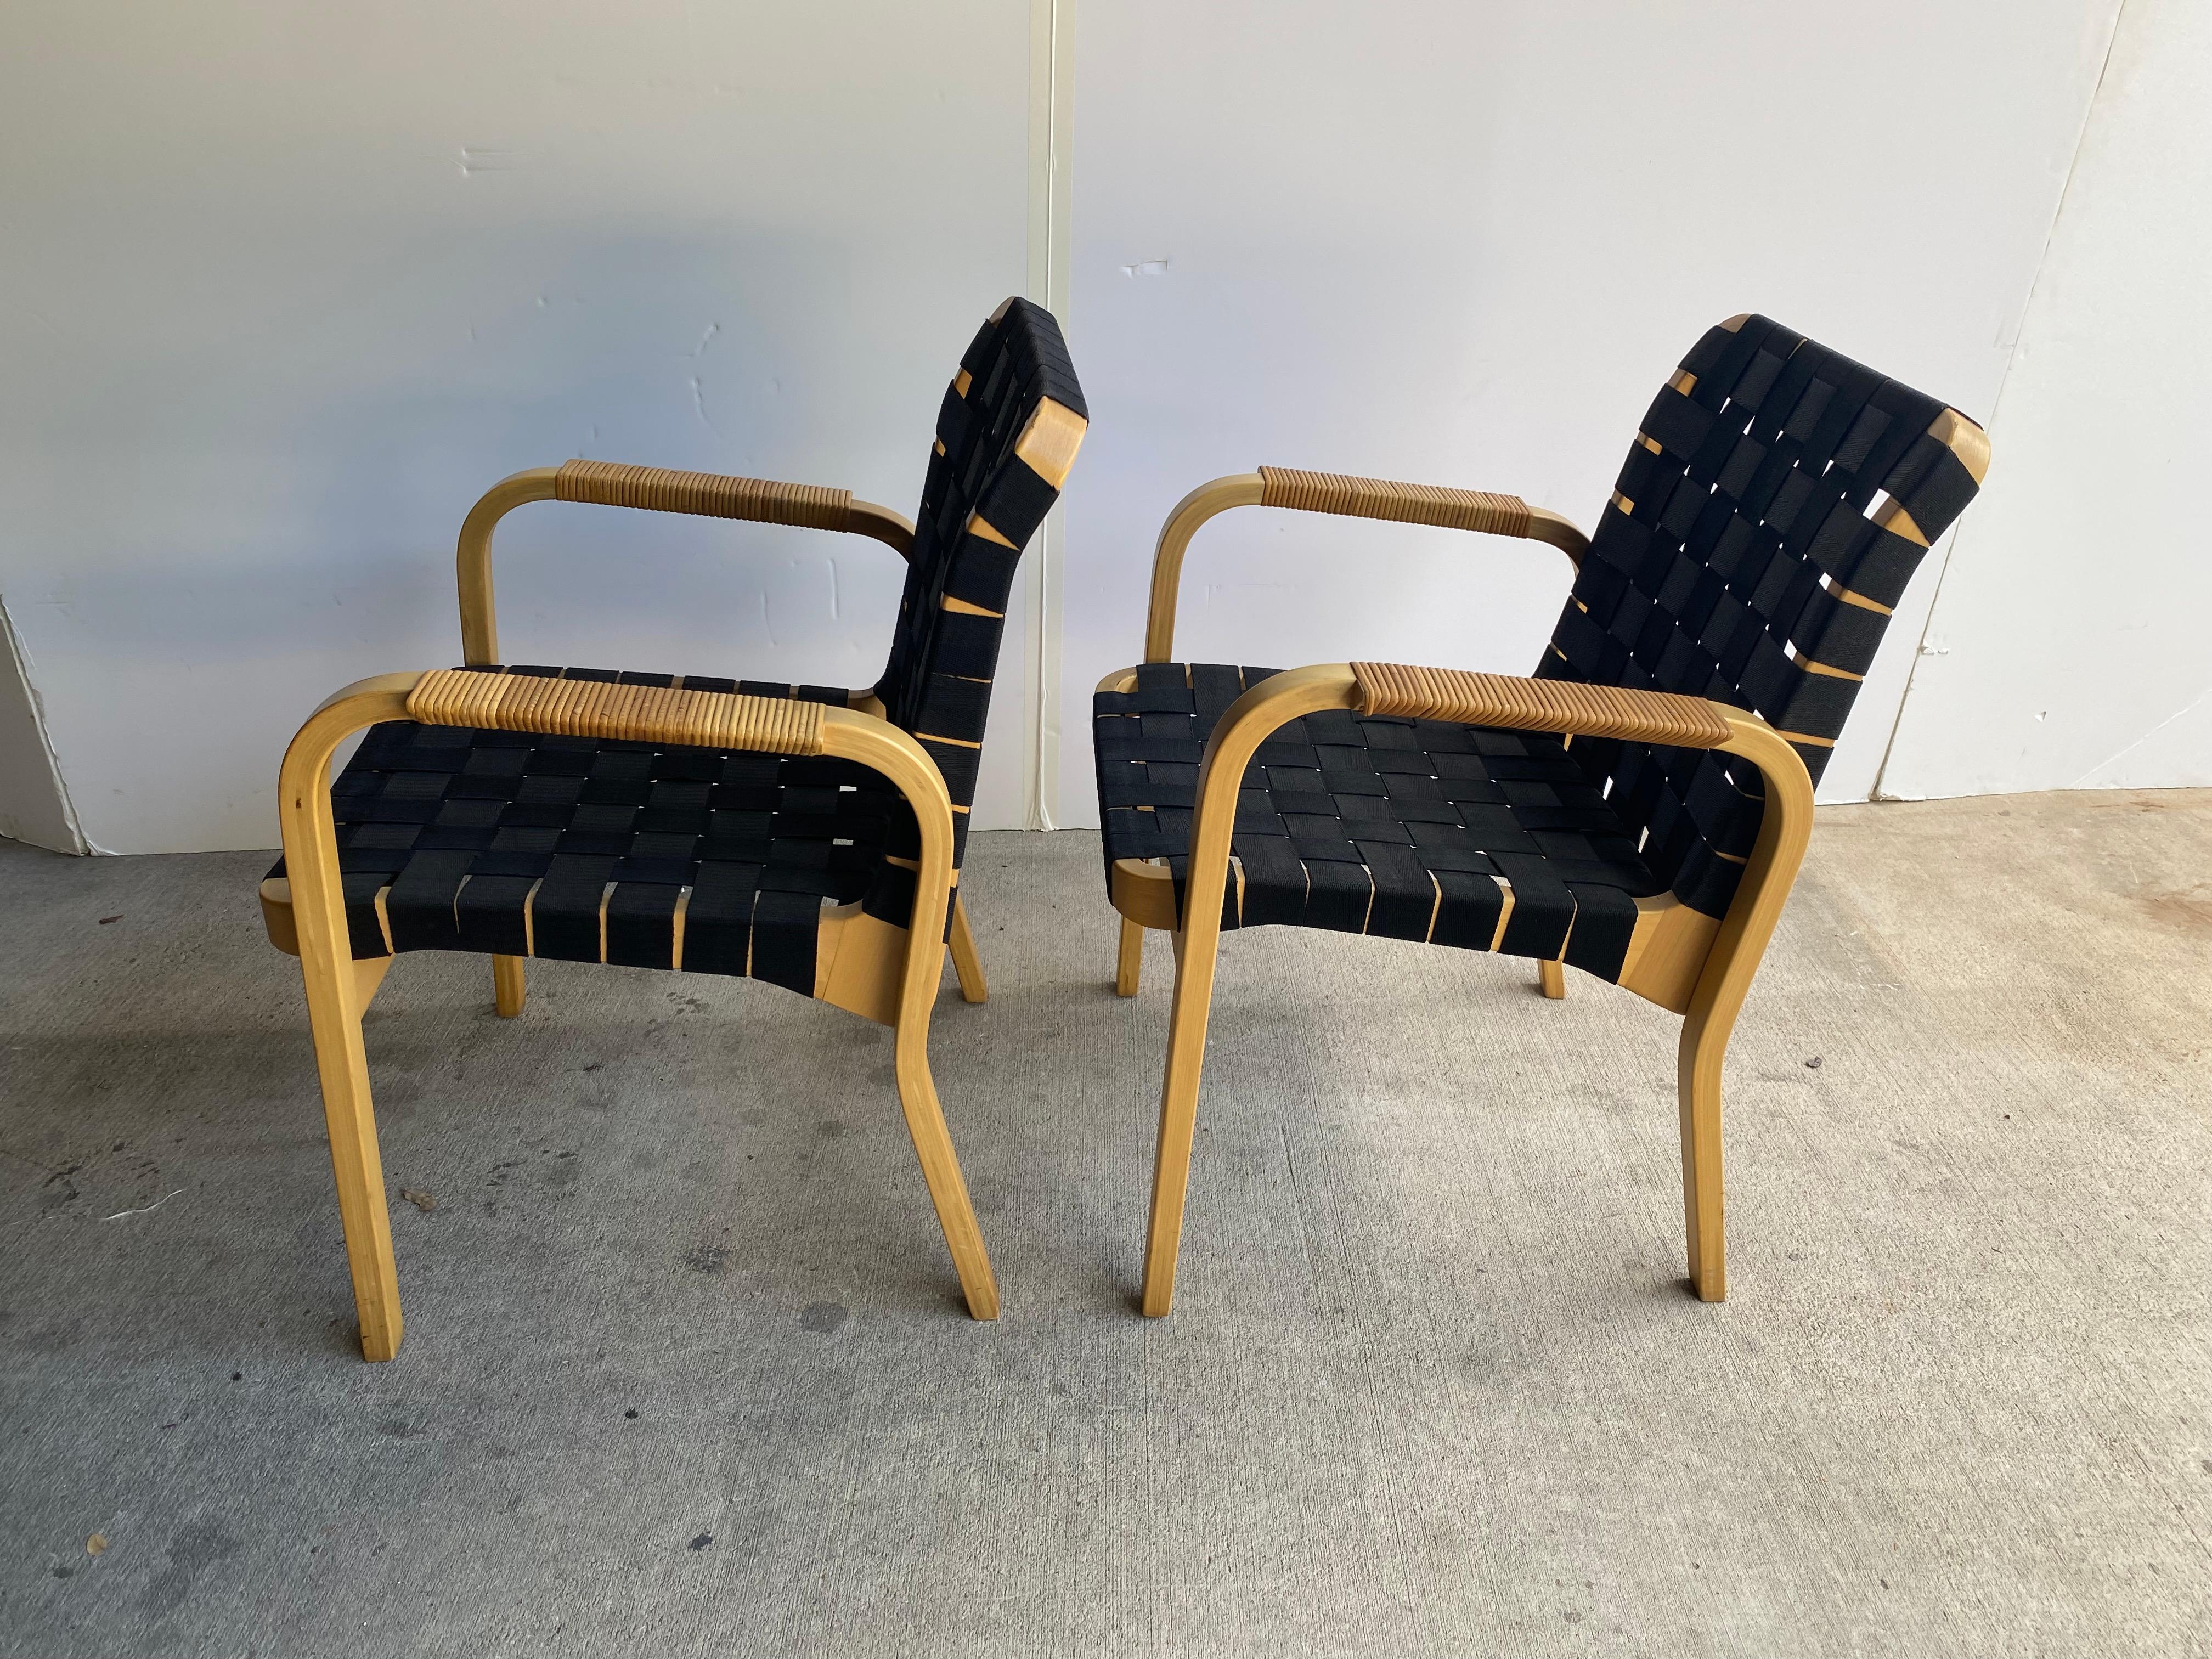 Alvar Aalto Armchairs with Black Straps, Finland, 1960's For Sale 1